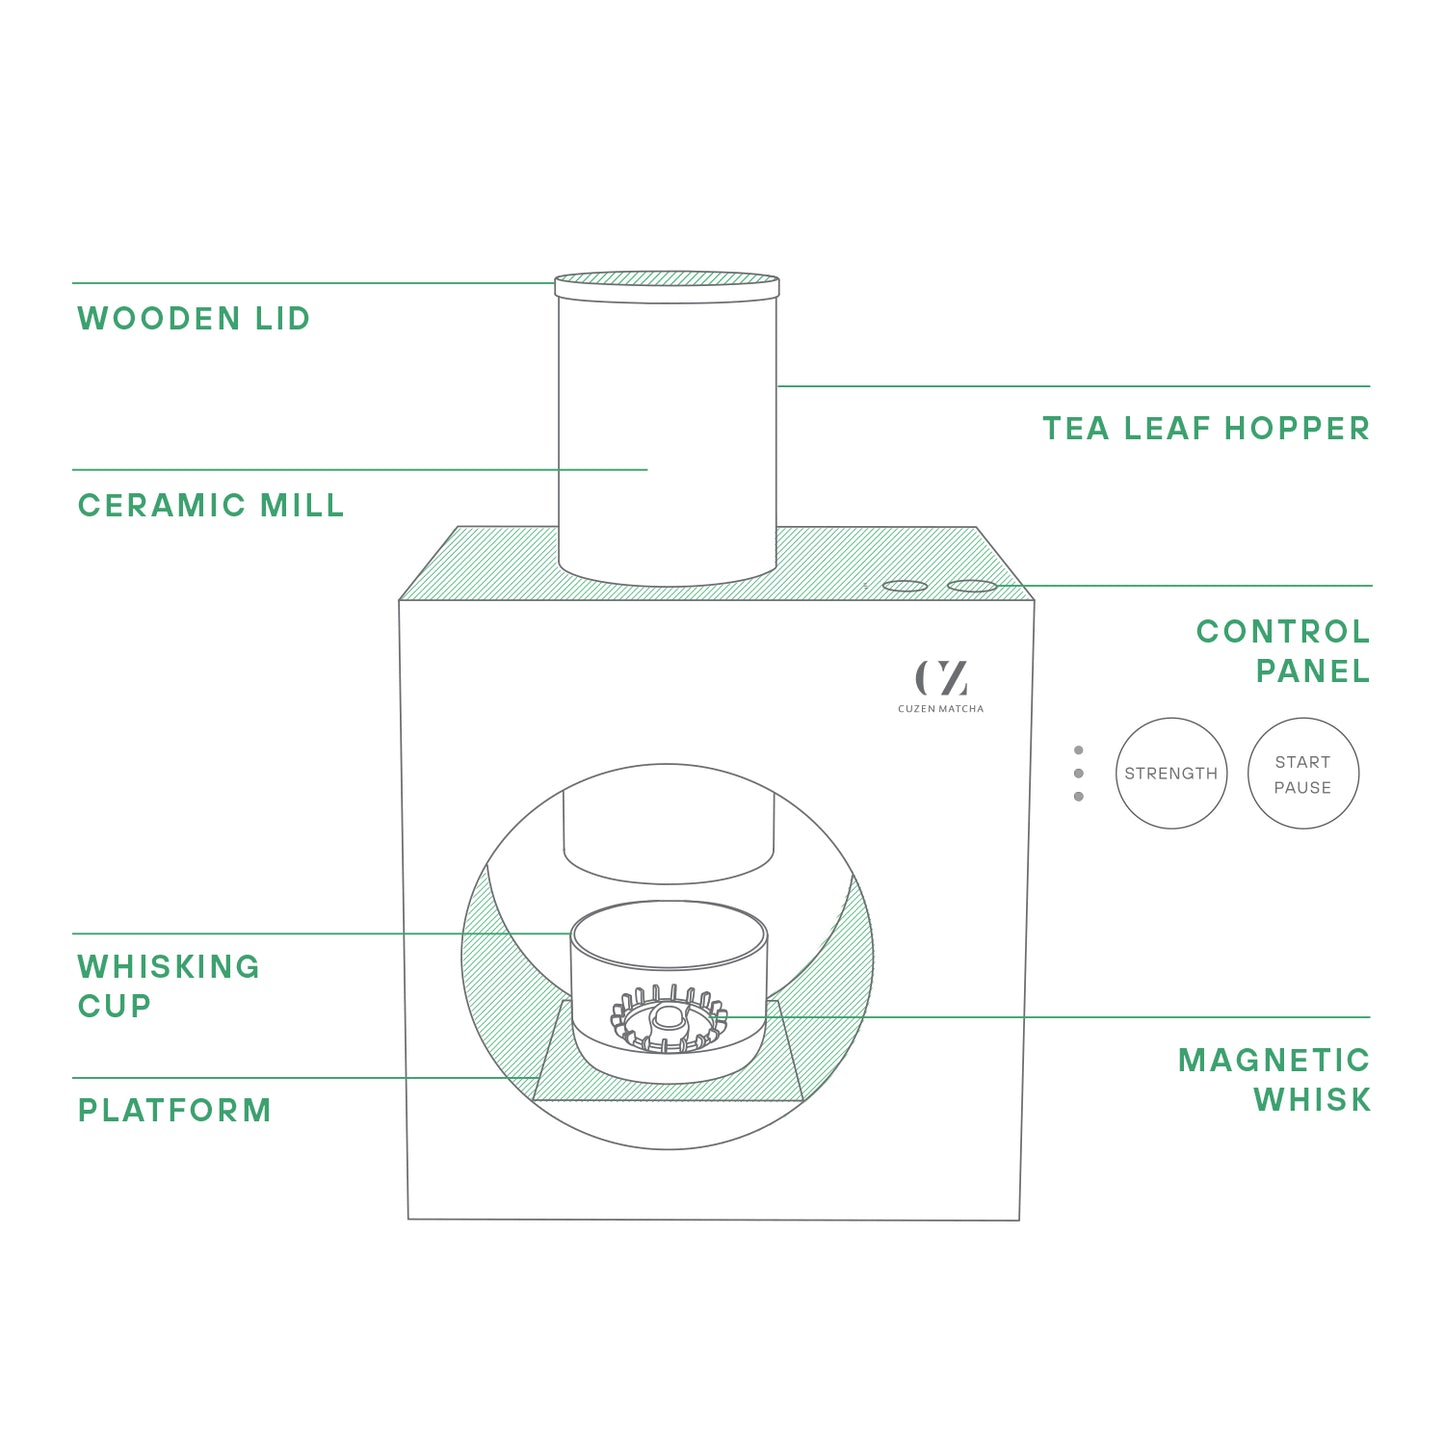 A diagram of the Matcha Maker’s parts and their locations, including the control panel and buttons.